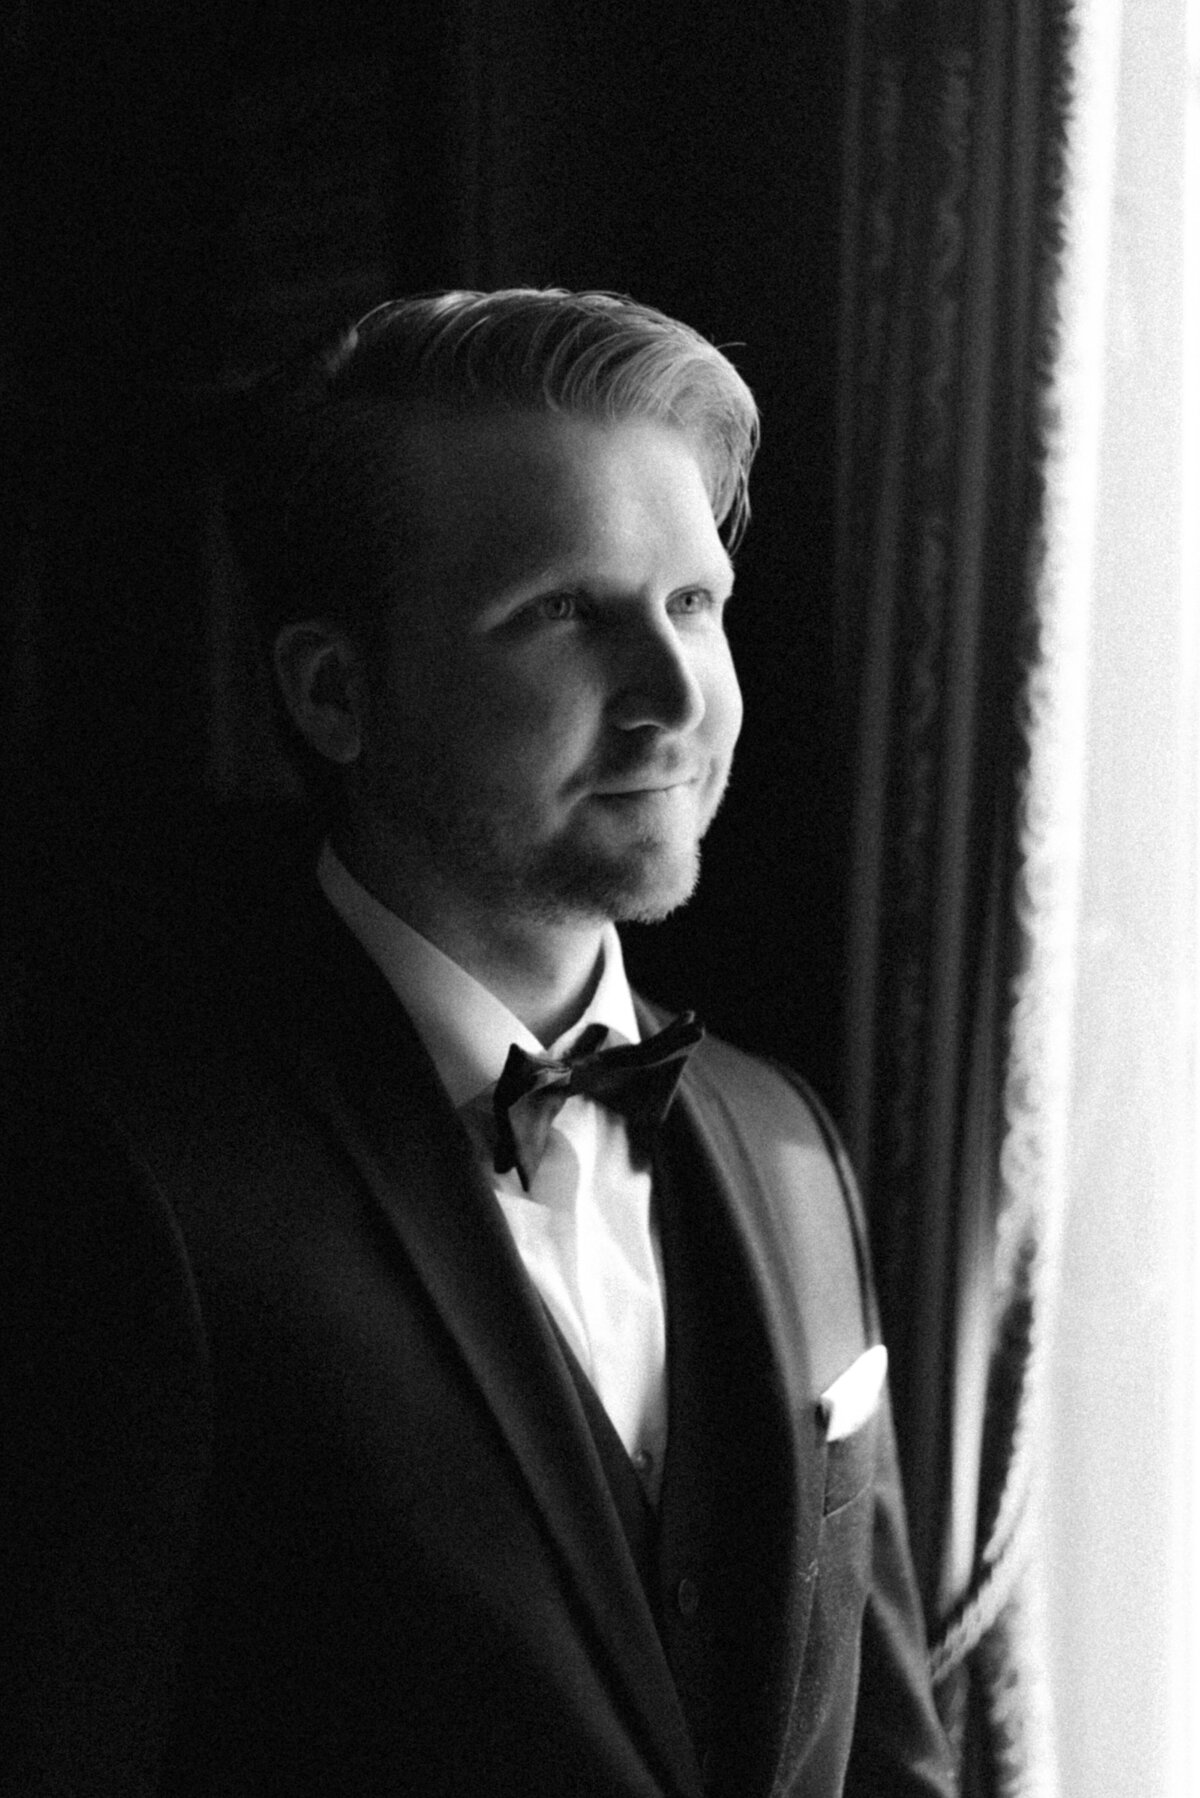 A portrait of the groom photographed by wedding photographer Hannika Gabrielsson.